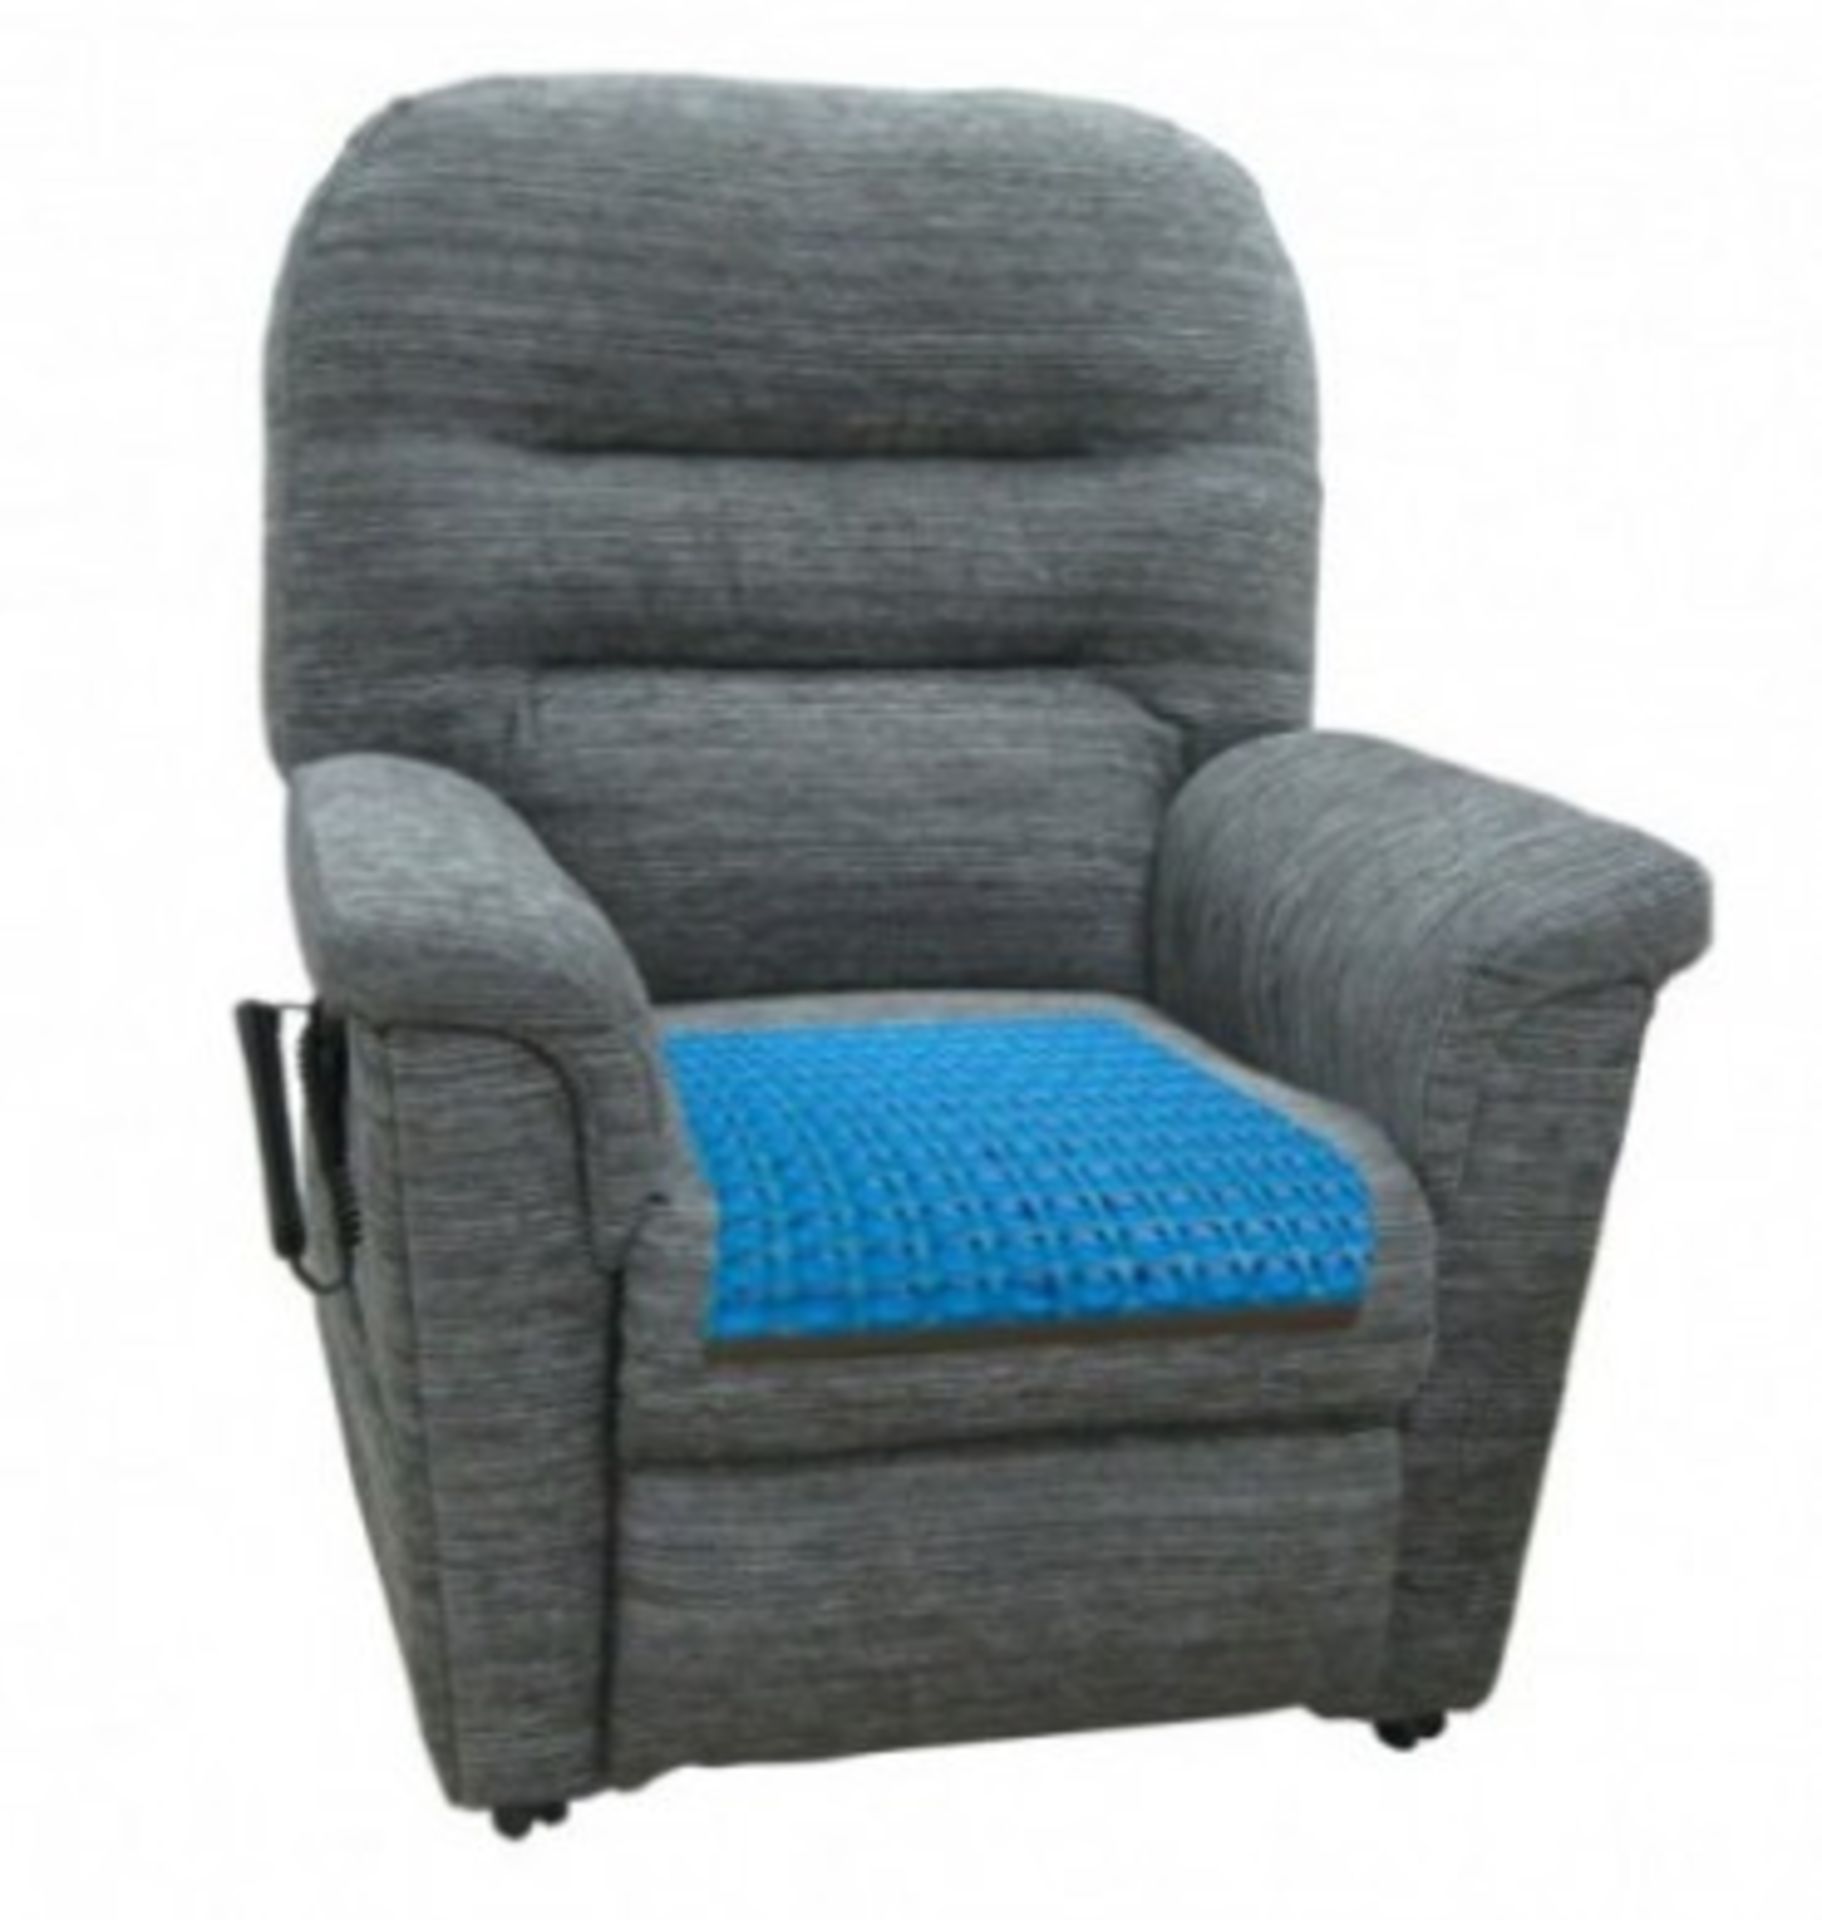 HOLLY RISE AND RECLINE ELECTRIC CHAIR